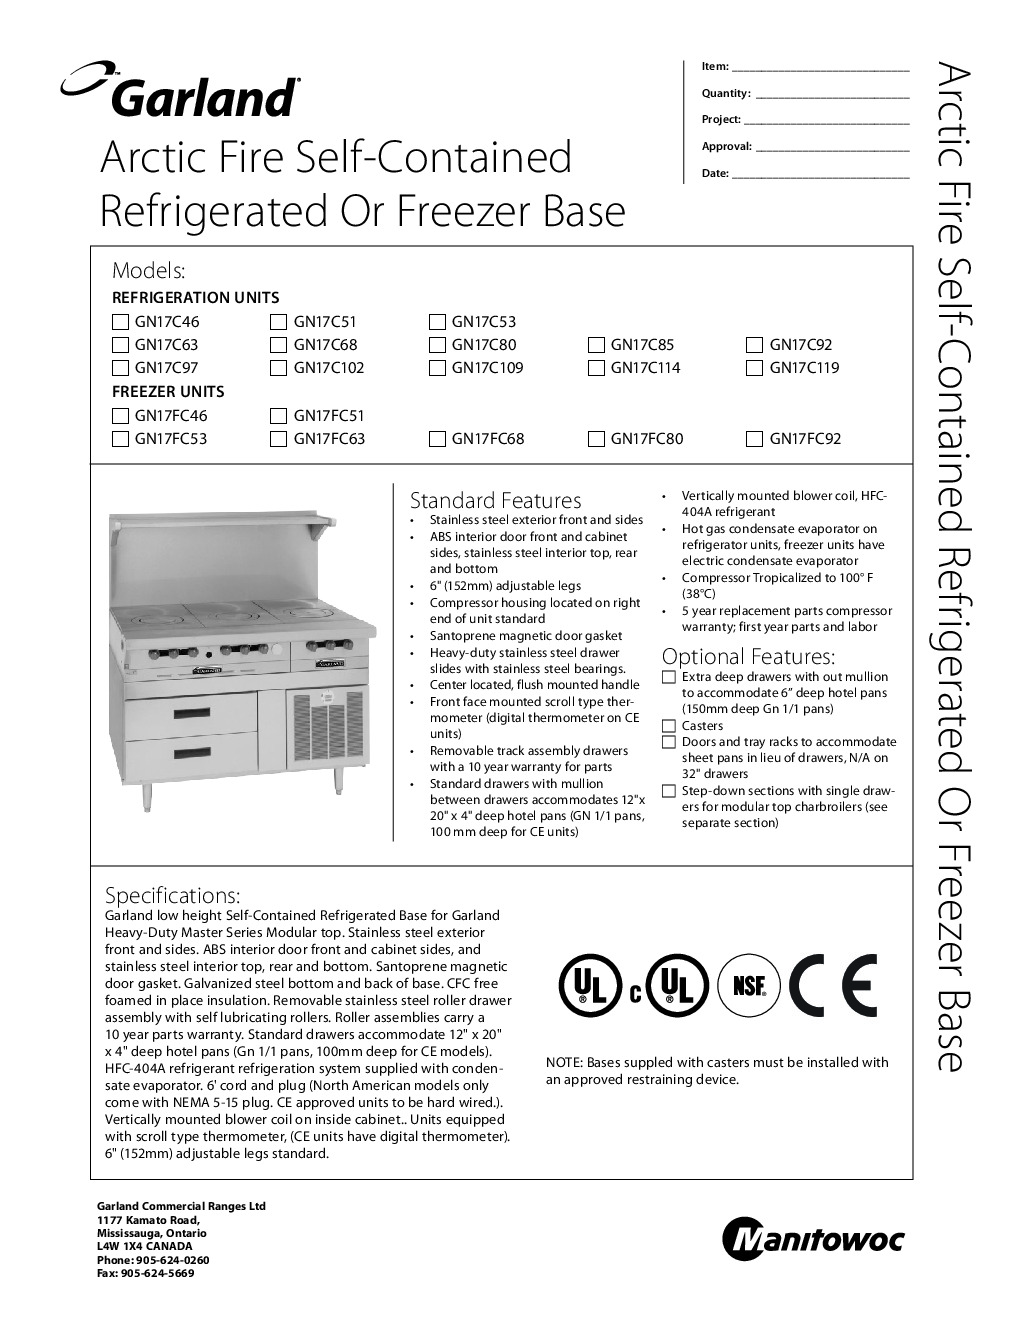 Garland US Range GN17C68 Refrigerated Base Equipment Stand